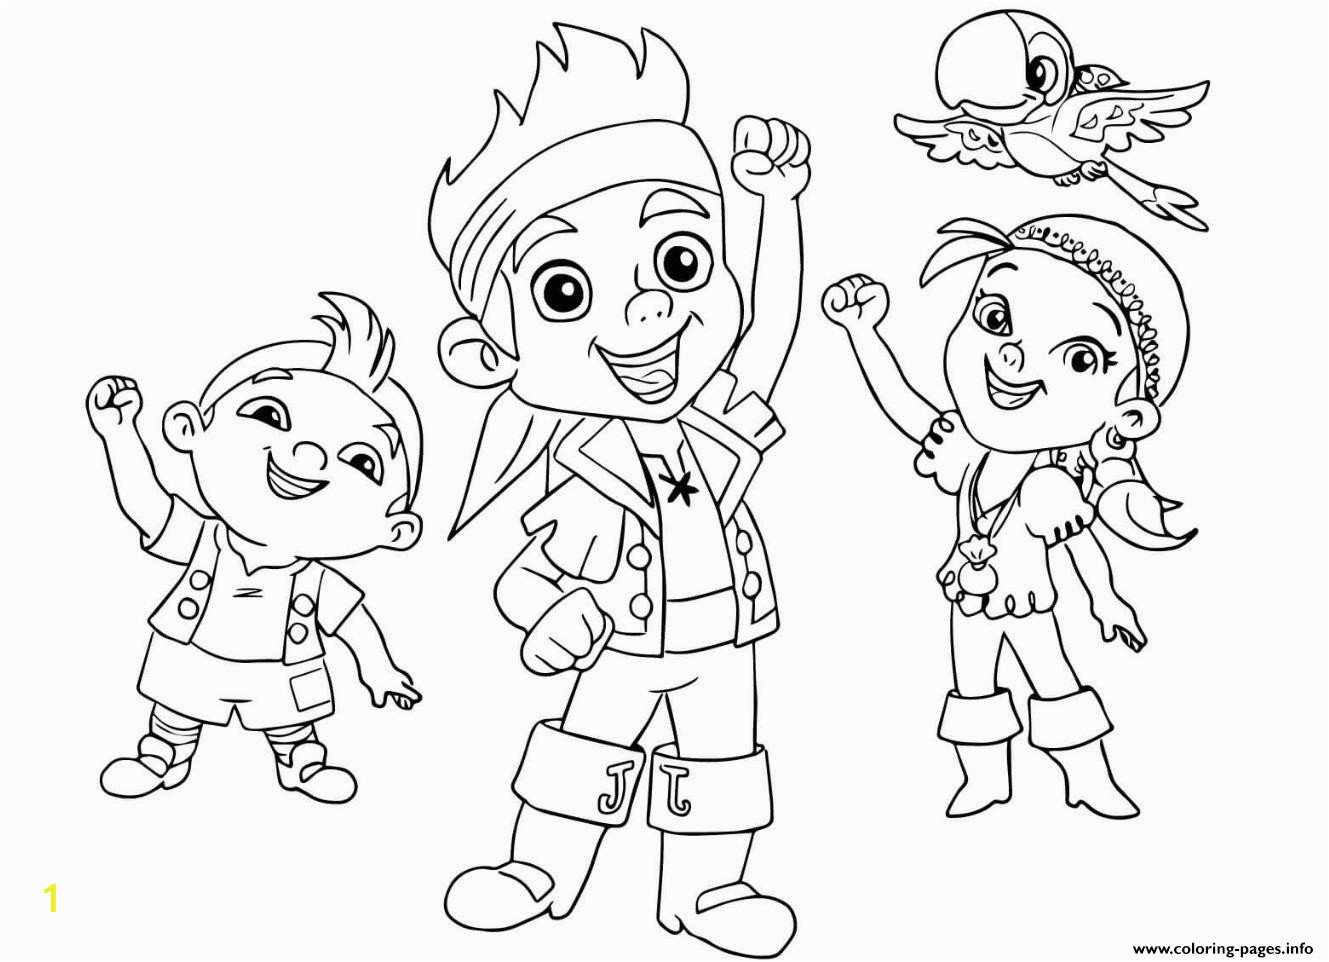 Jake and the Neverland Pirates Coloring Pages Halloween Jake and the Neverland Pirates Team Halloween Coloring